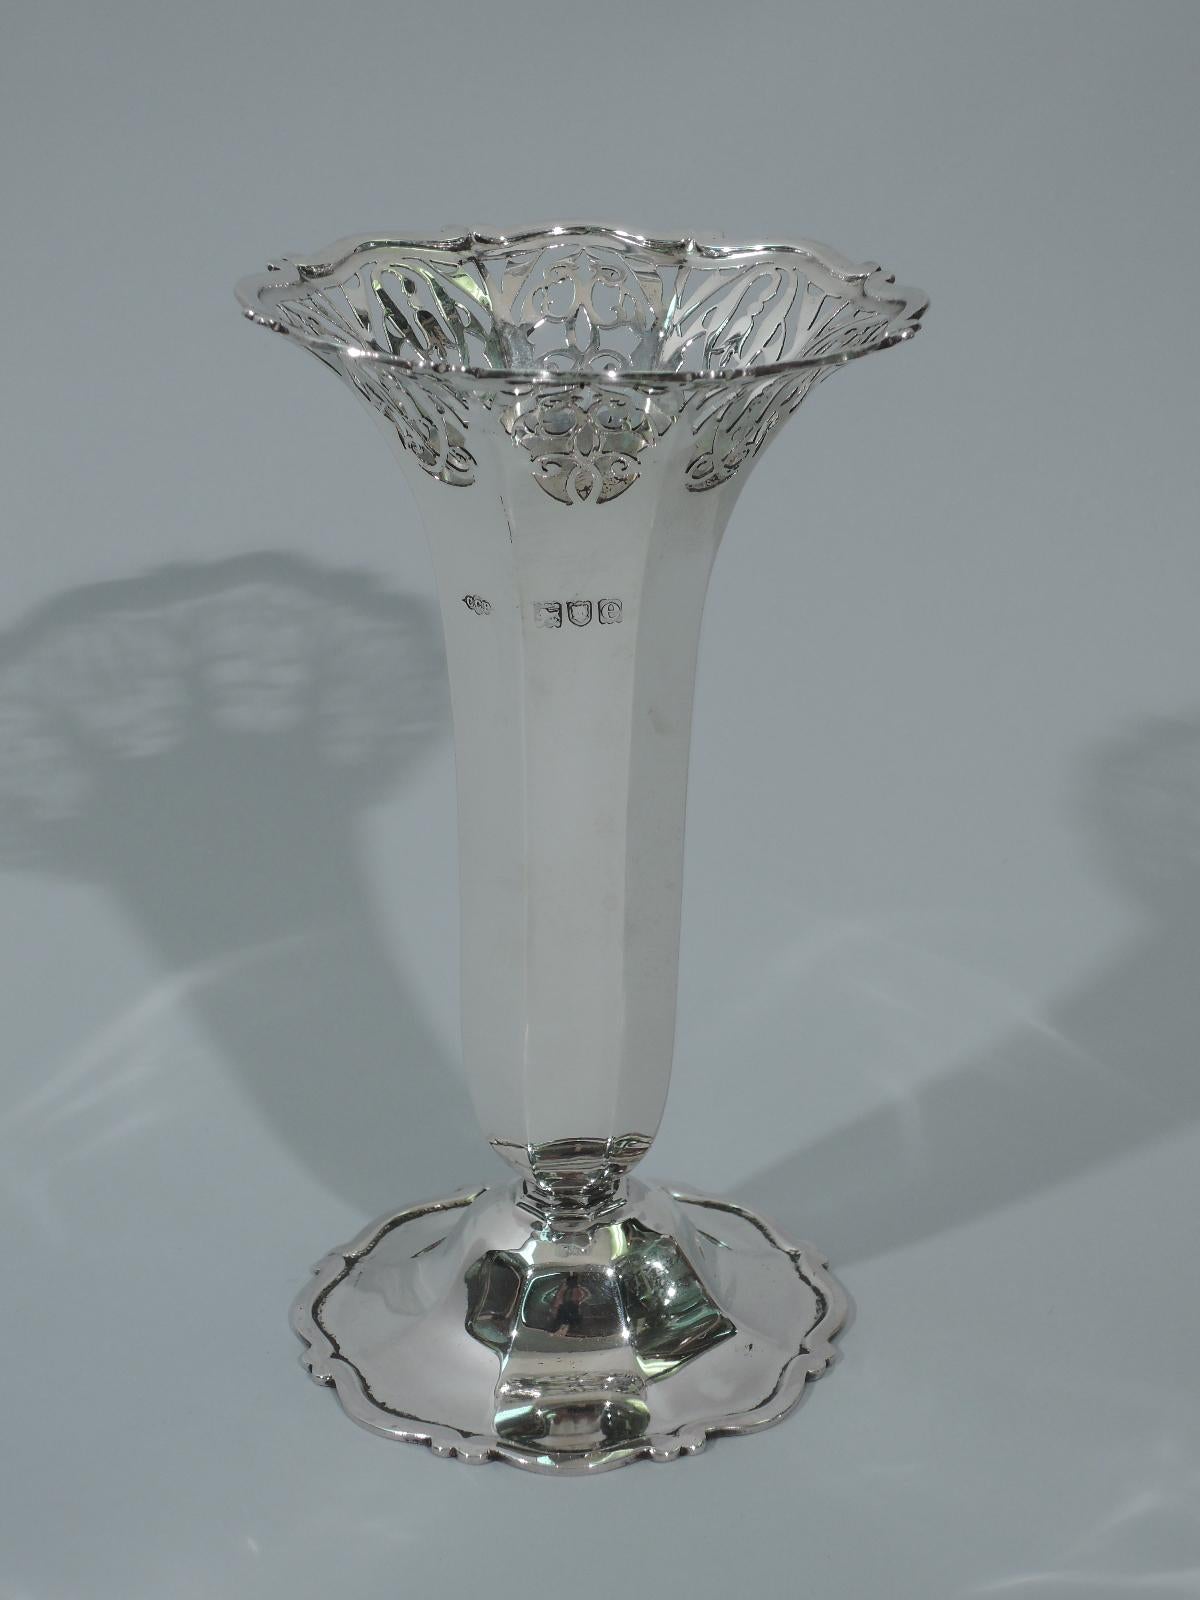 Victorian sterling silver vase. Made by Charles Clement Pilling–Sibray Hall & Co. in London in 1900. Faceted body on raised and faceted foot. Scrolls applied to rim and foot rim. Pierced scrolls and flowers. Hallmarked. Design number 354771